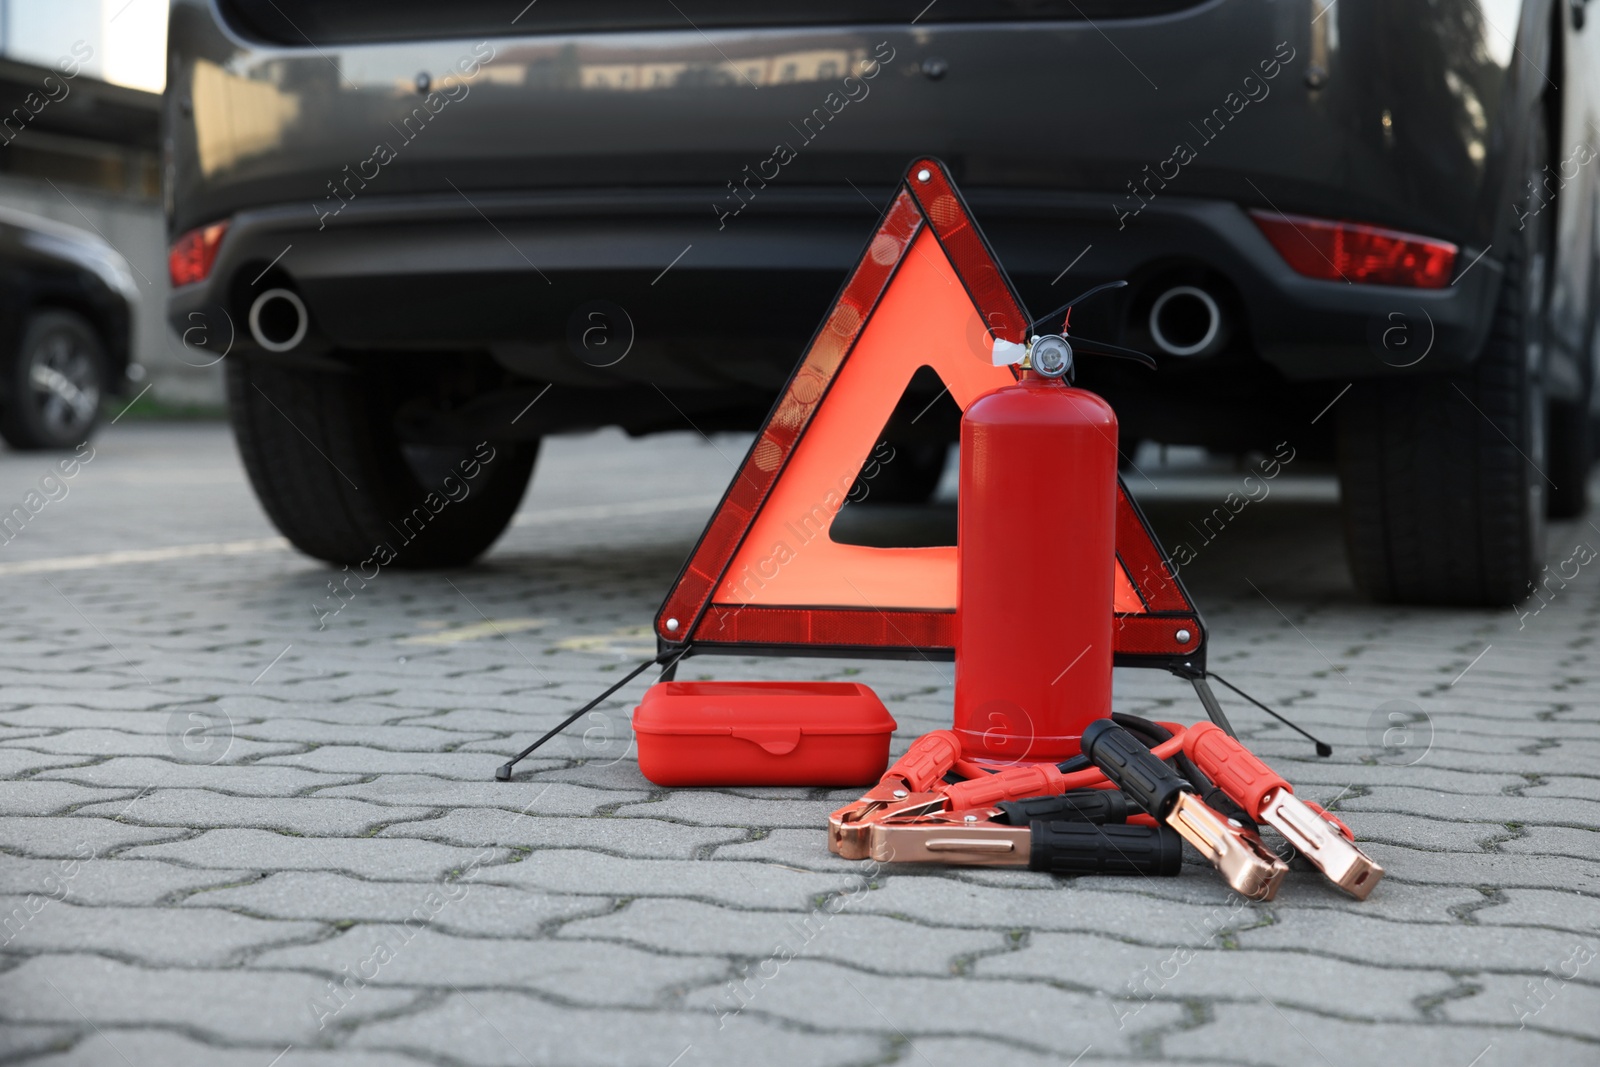 Photo of Emergency warning triangle and safety equipment near car, space for text